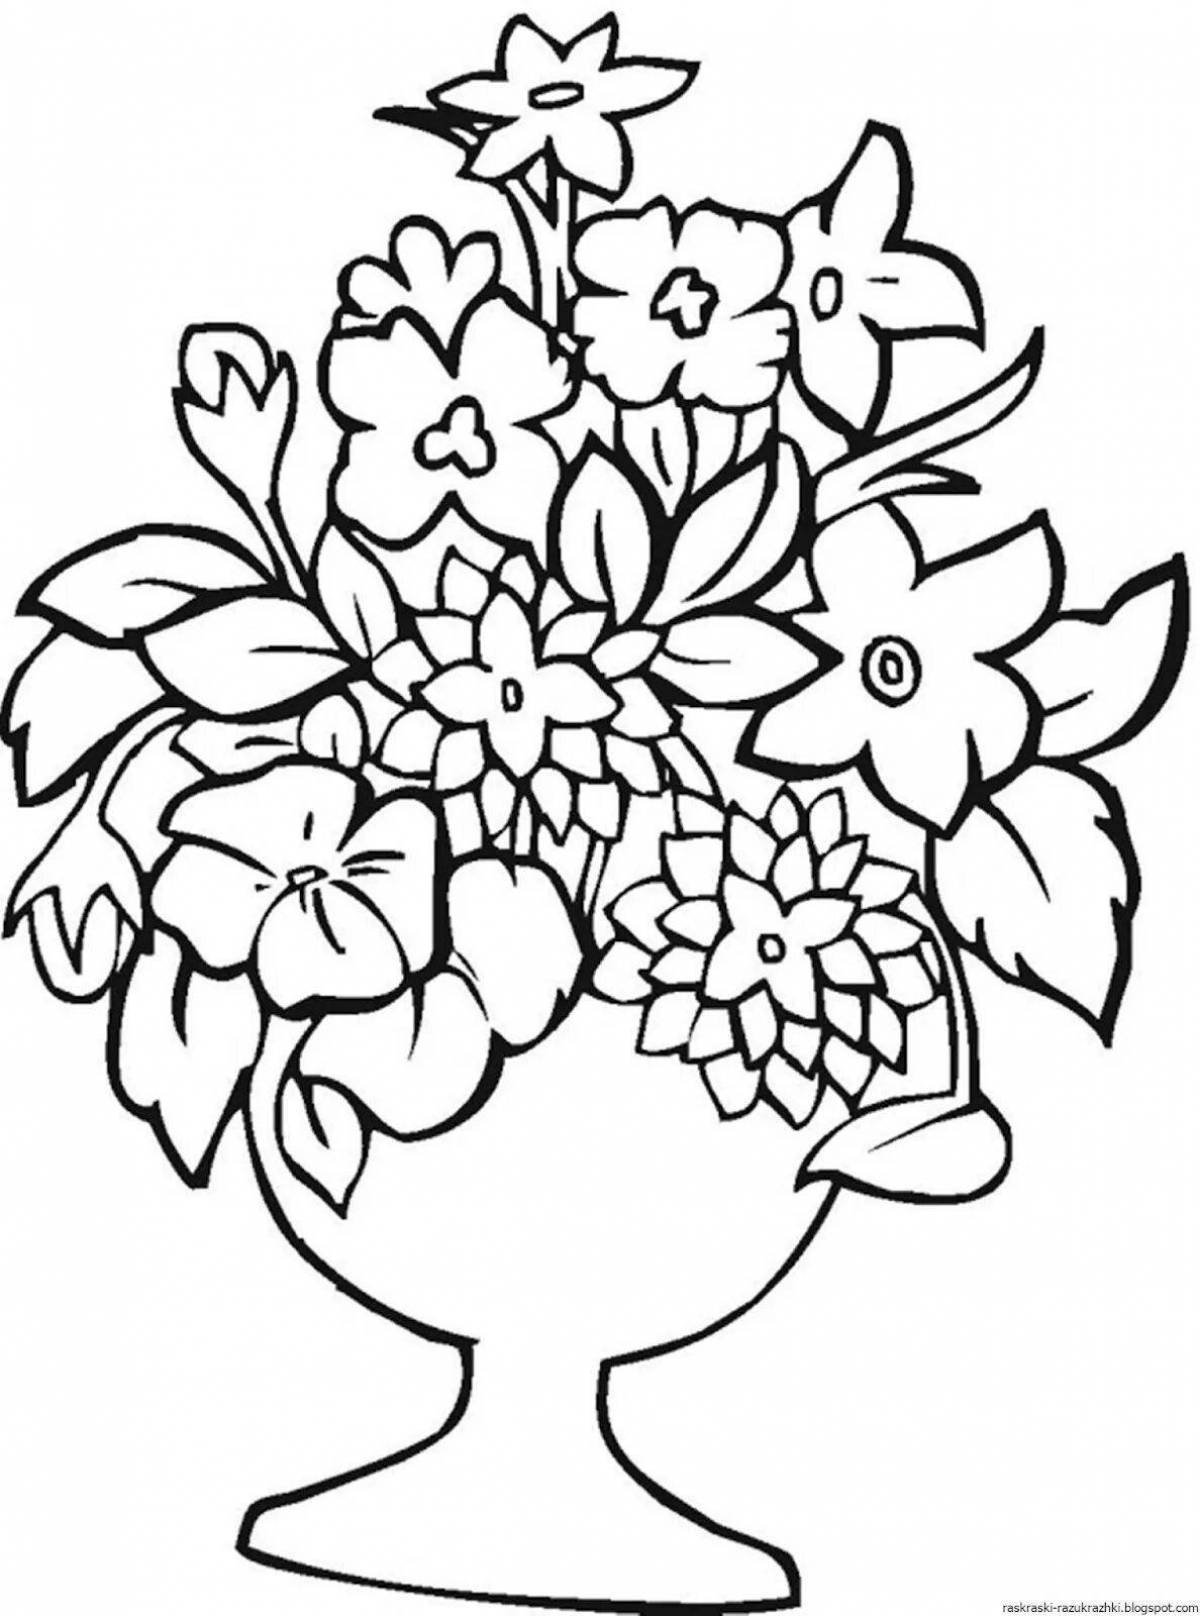 Great flowers in a vase coloring book for kids